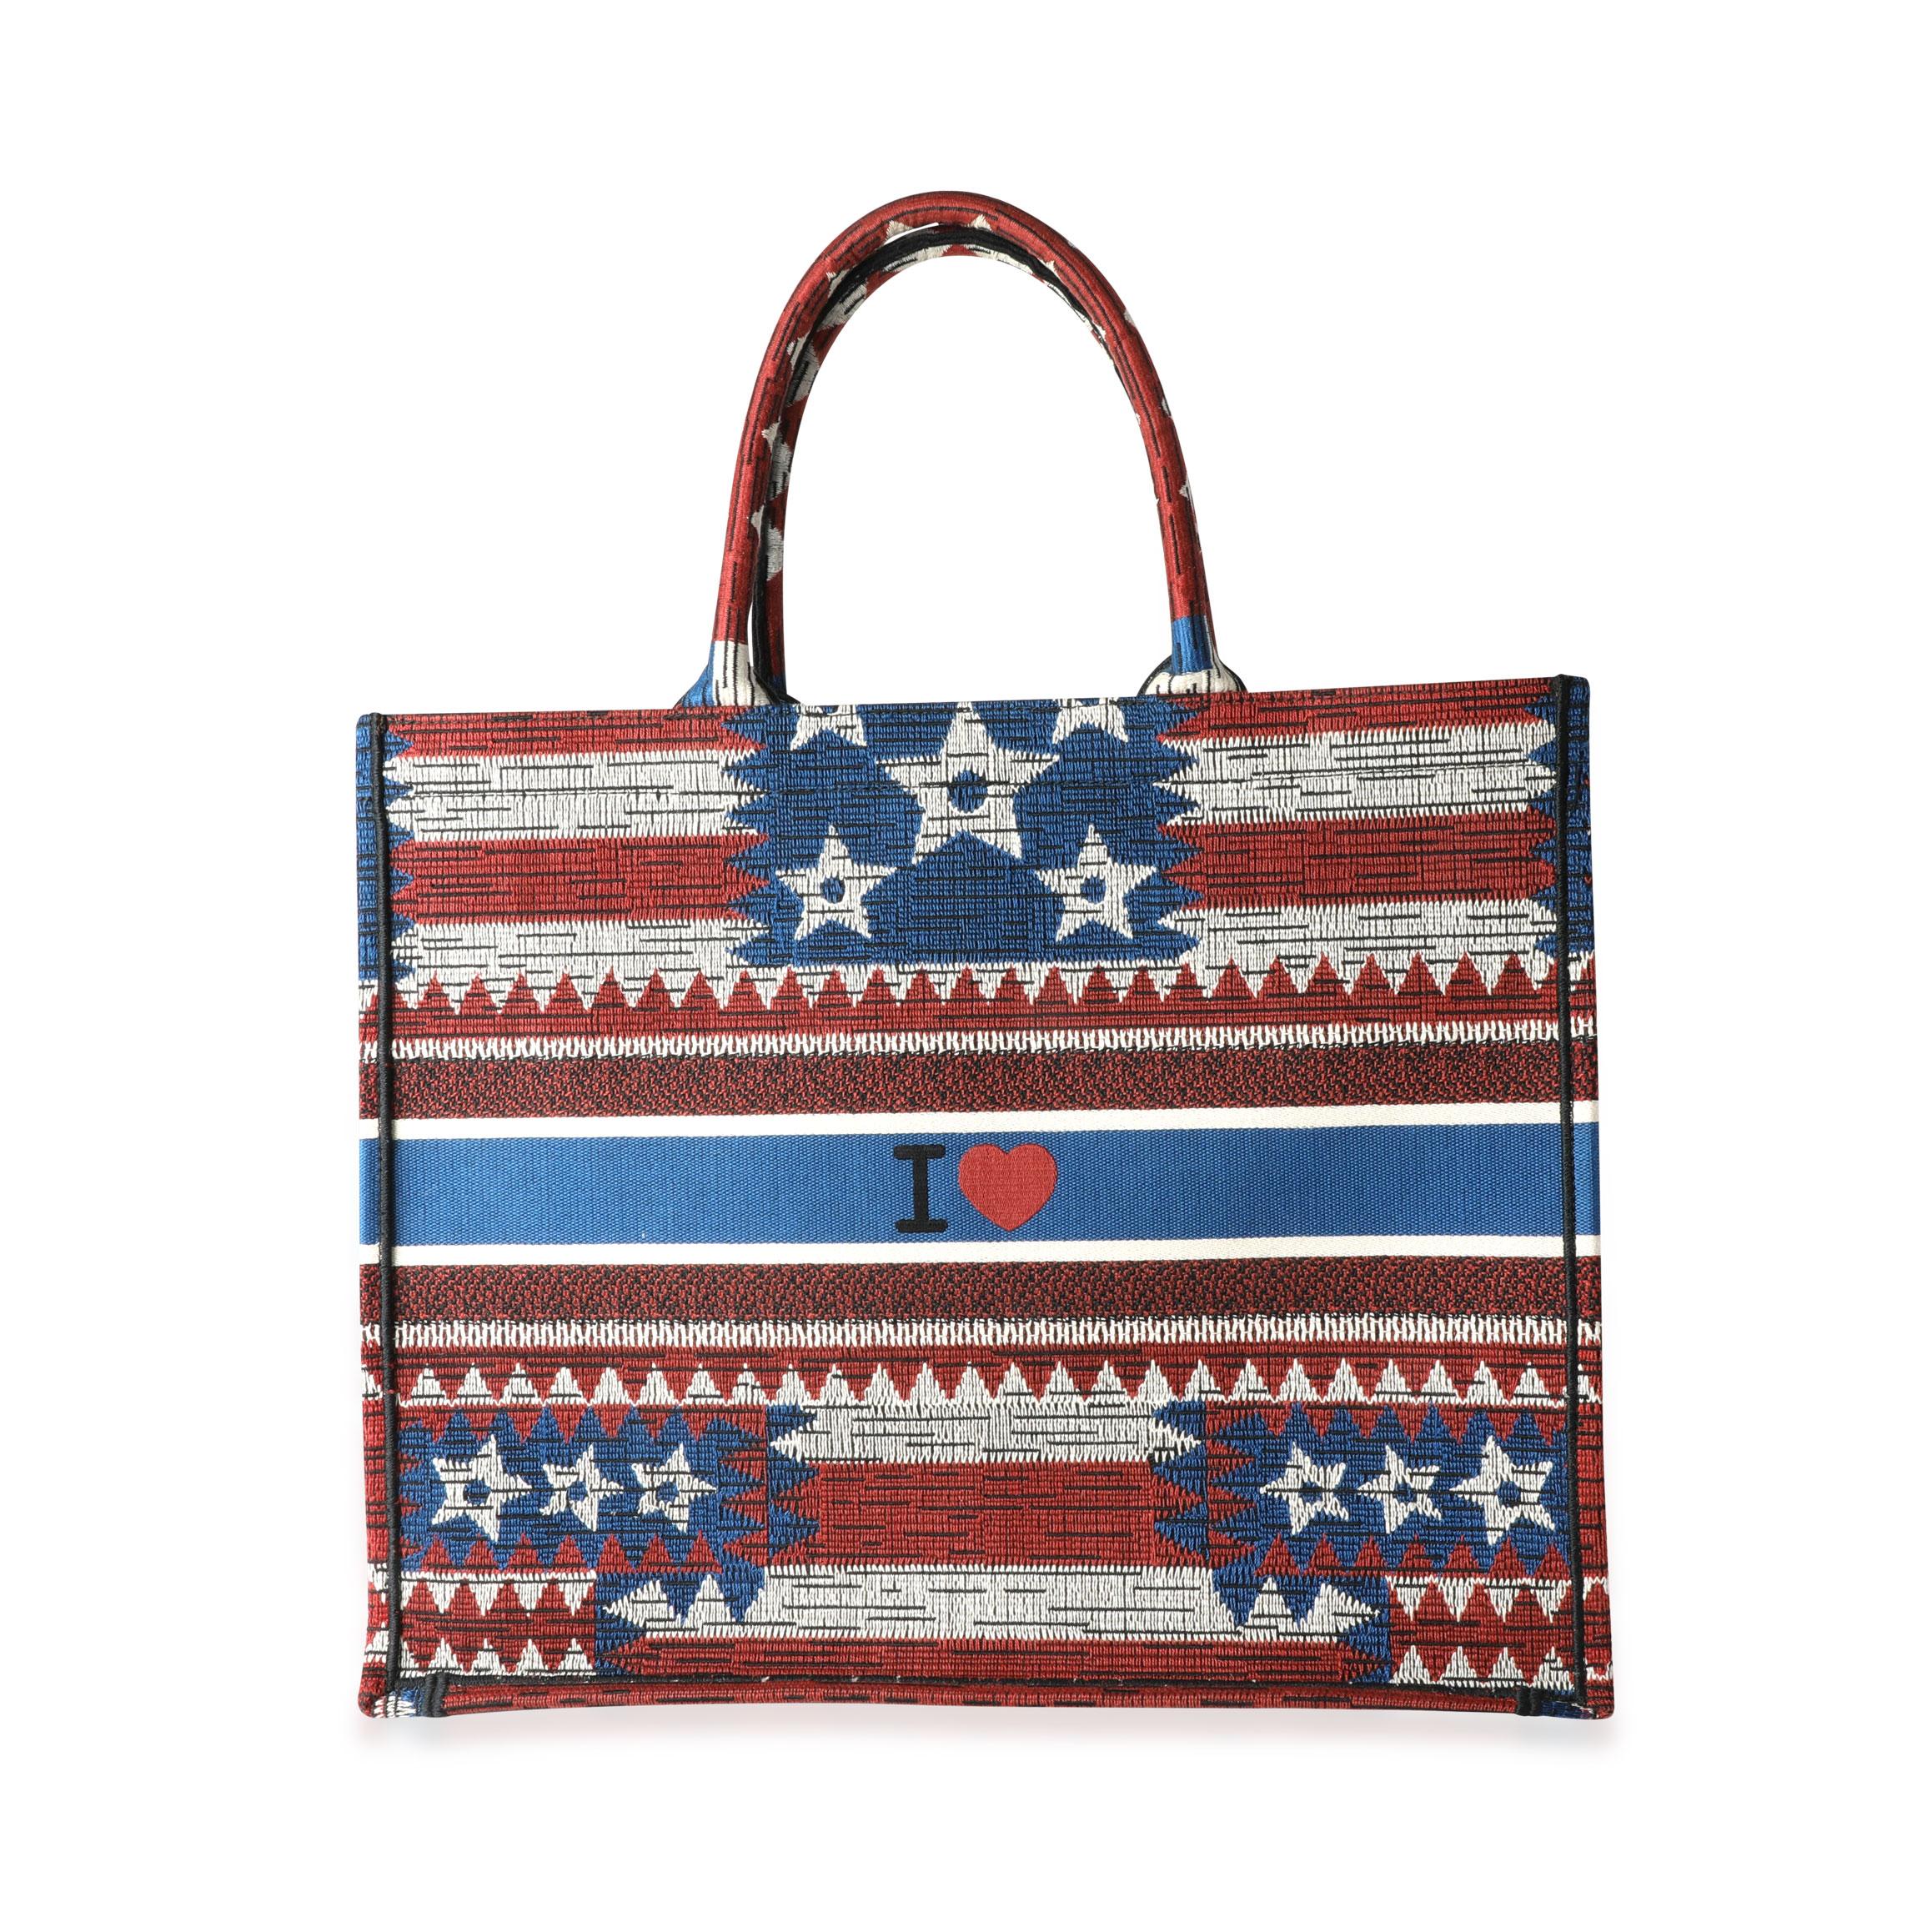 Listing Title: Dior Red, White, & Blue American Flag Large Book Tote
SKU: 114883
MSRP: 3000.00
Condition: Pre-owned (3000)
Handbag Condition: Excellent
Condition Comments: Excellent Condition. Light fraying to fabric. No other visible signs of